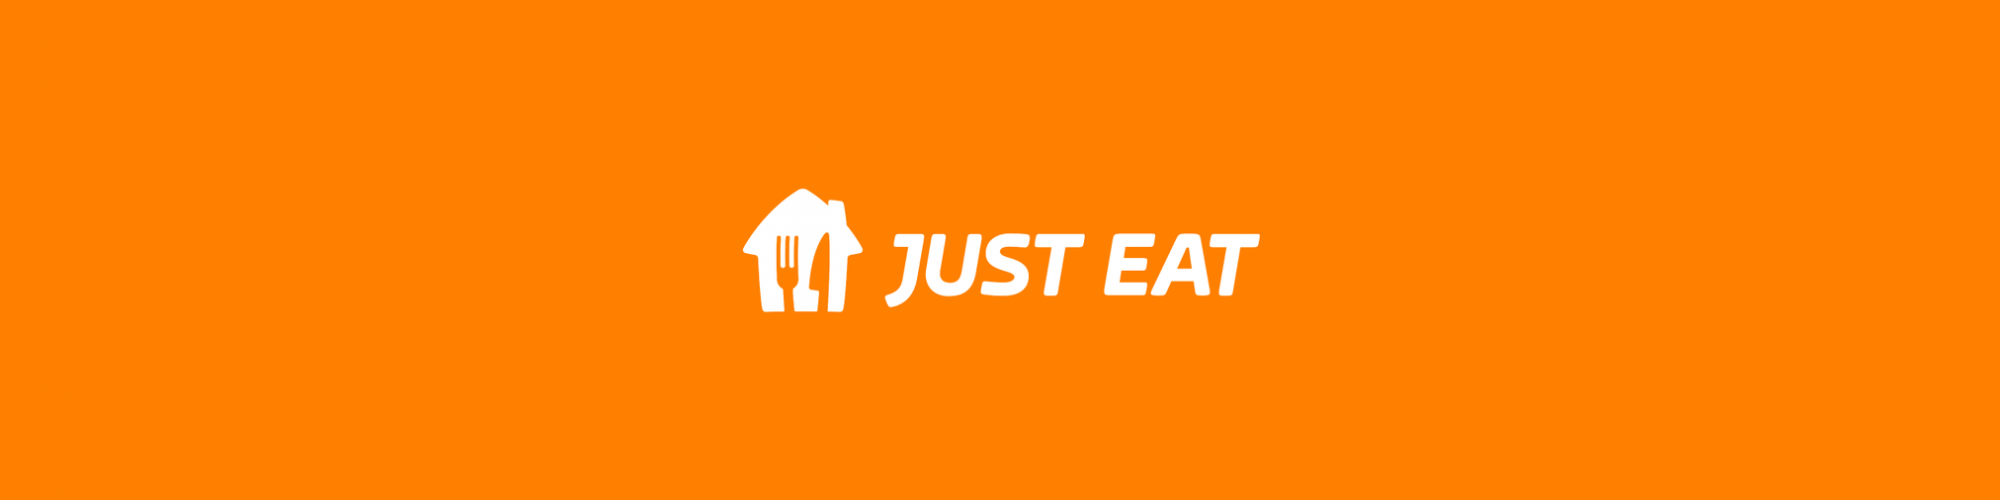 Just Eat cover image